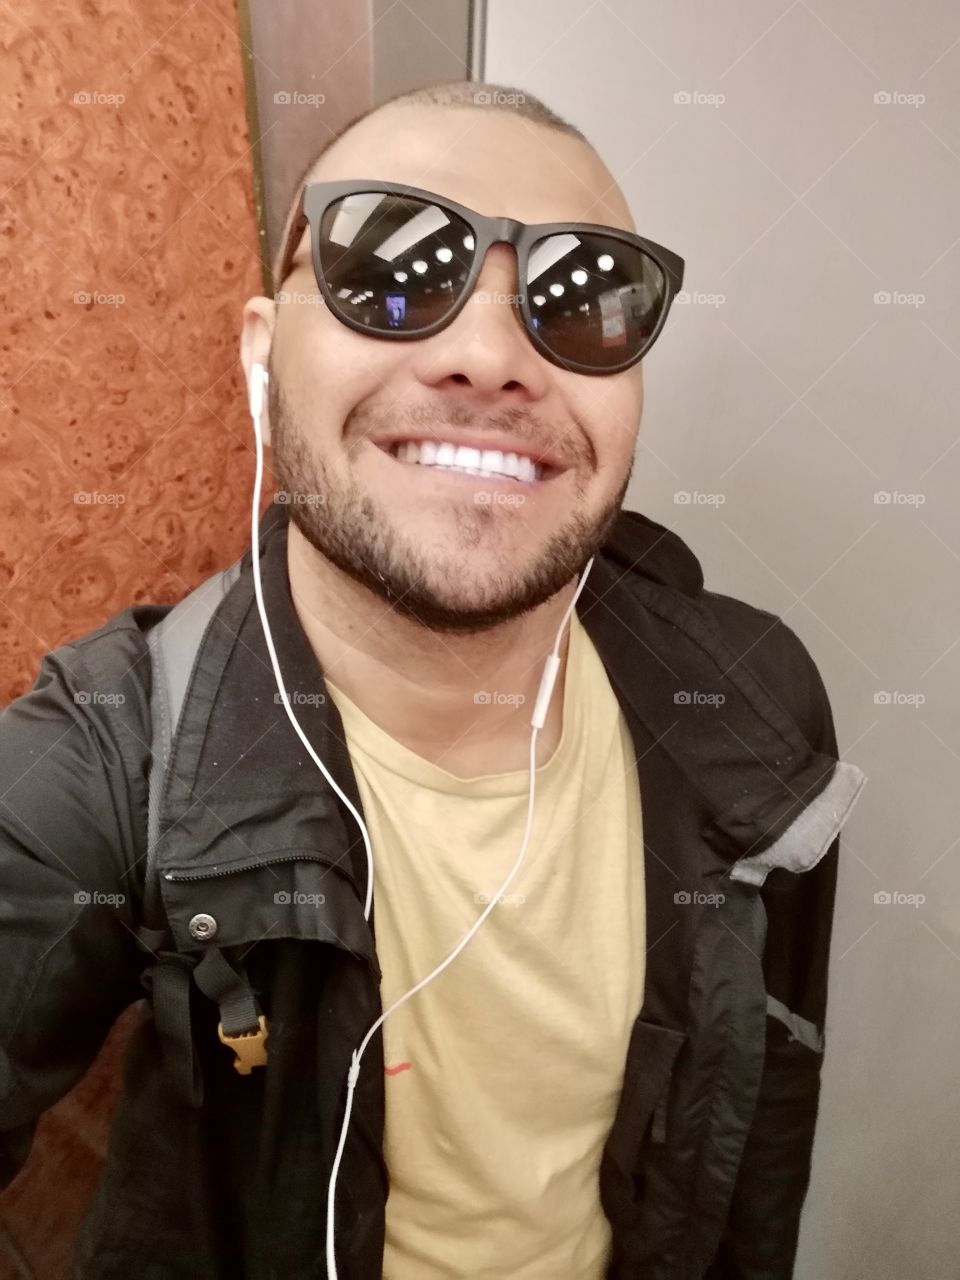 Smiling man with sunglasses, coat and headphones